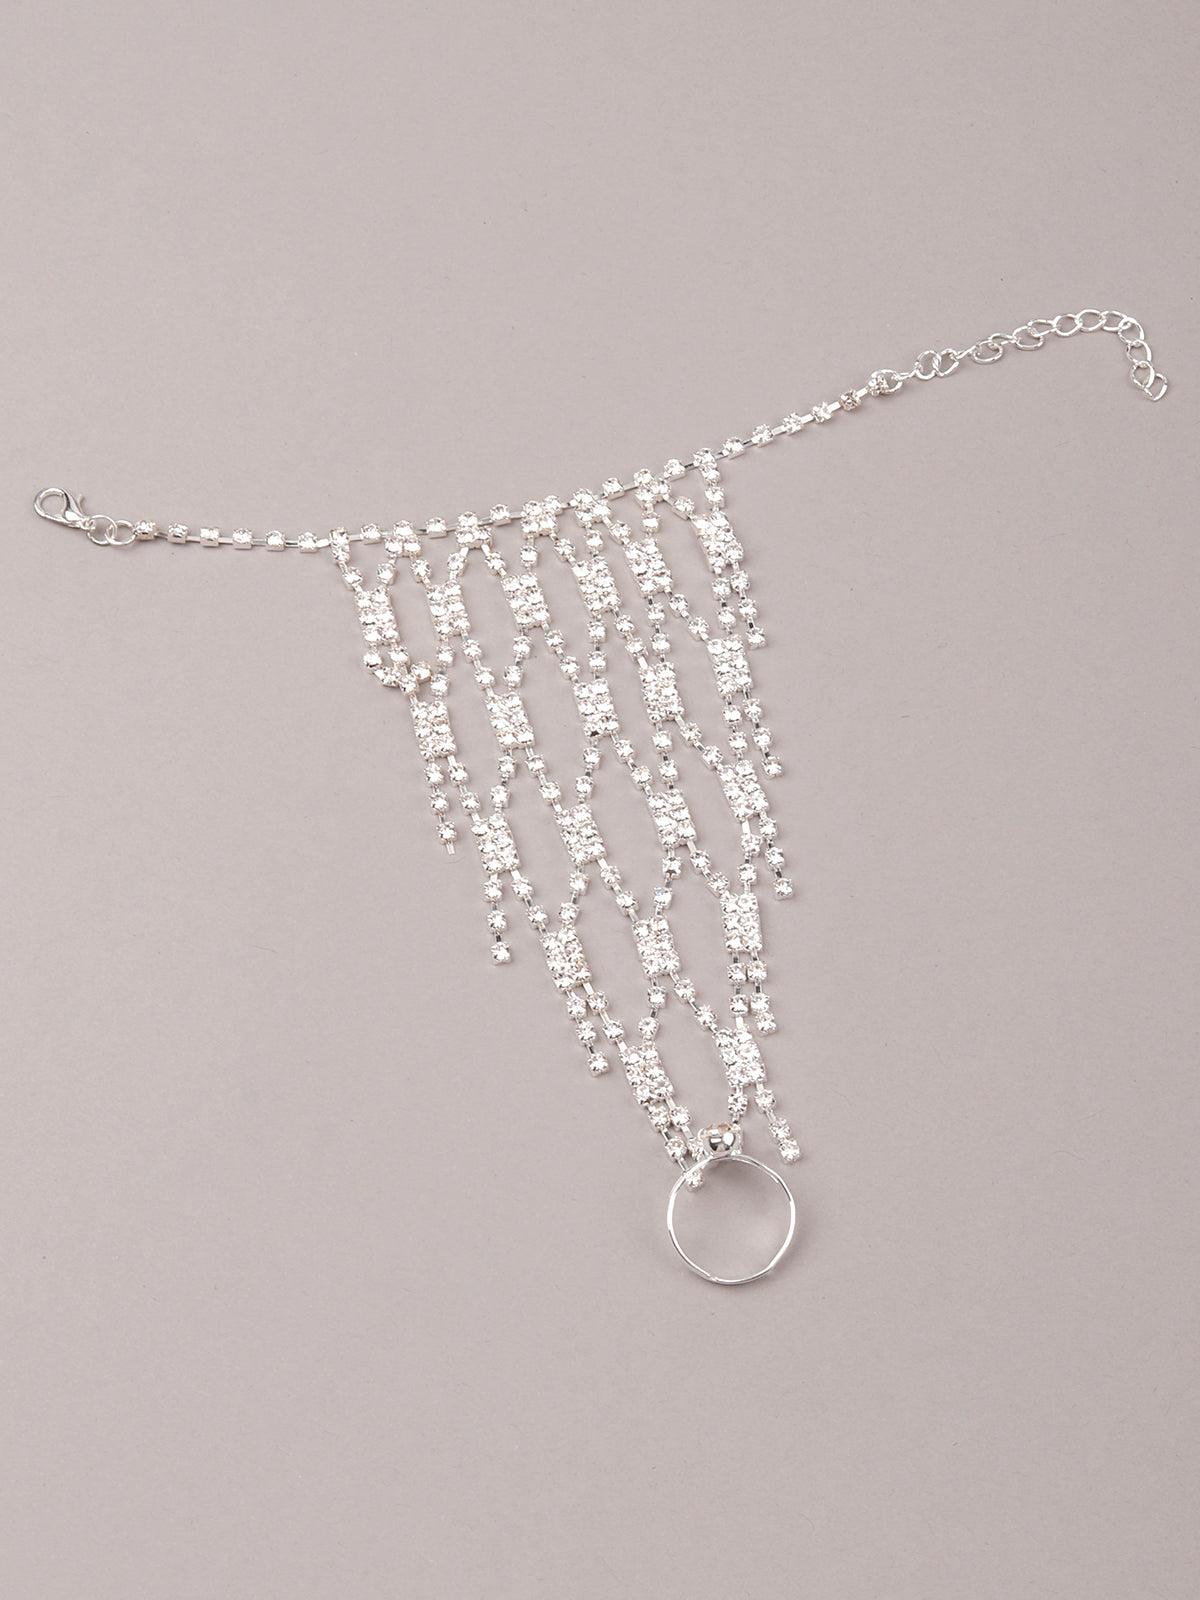 Women's Diamantã© Infused Embellished Stunning Hand Chain - Odette